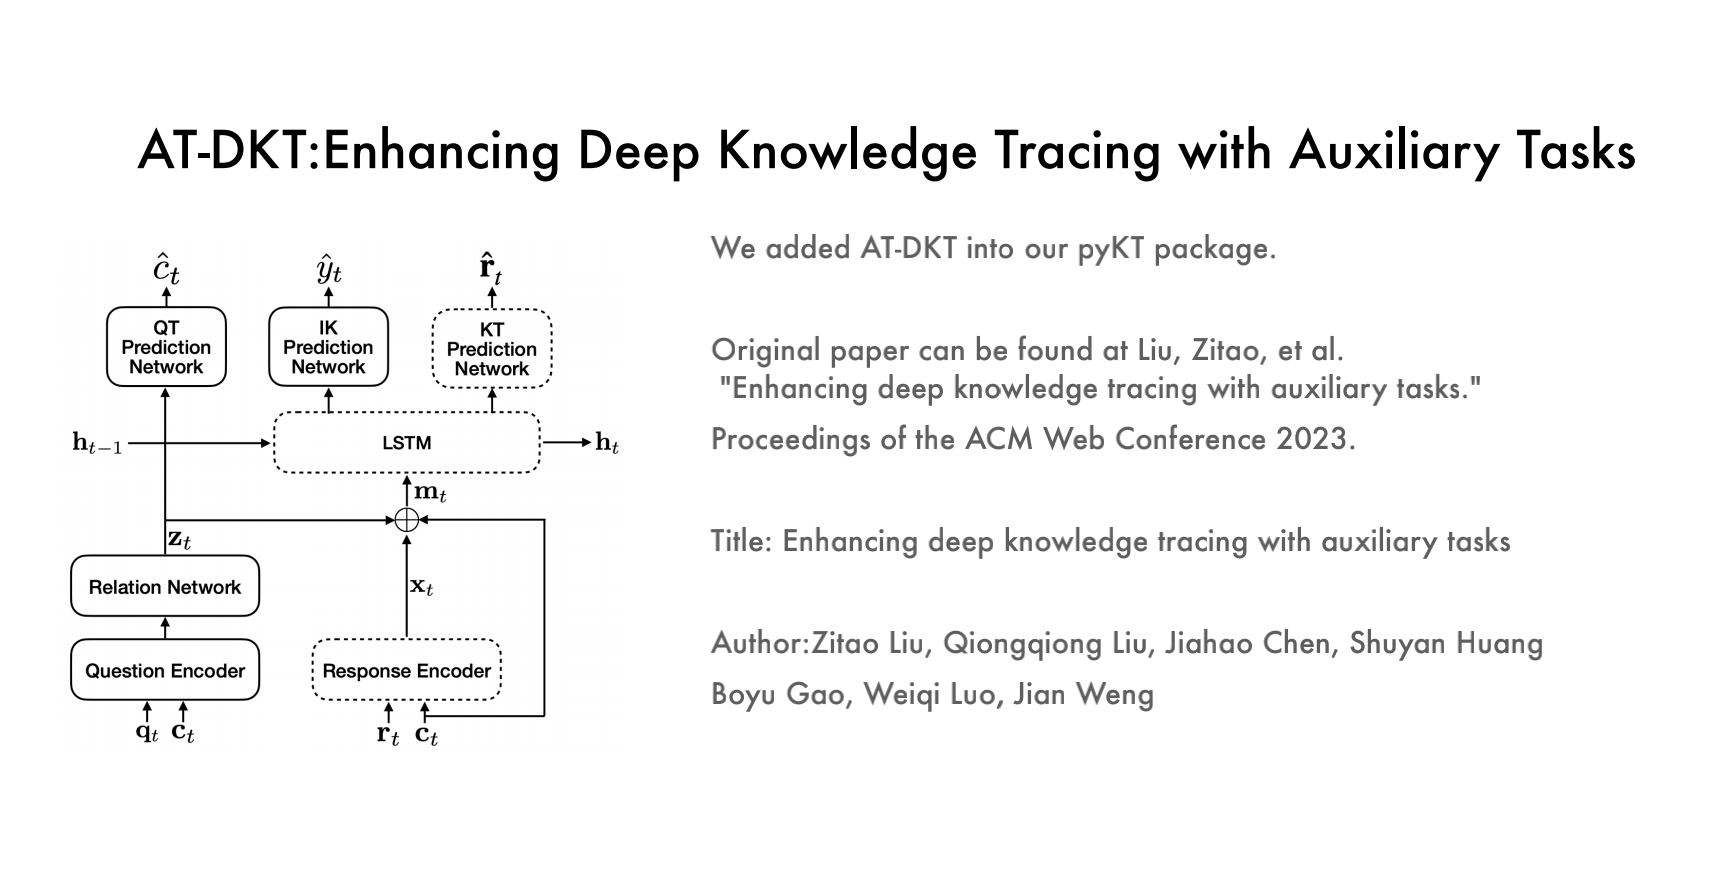 AT-DKT:Enhancing deep knowledge tracing with auxiliary tasks